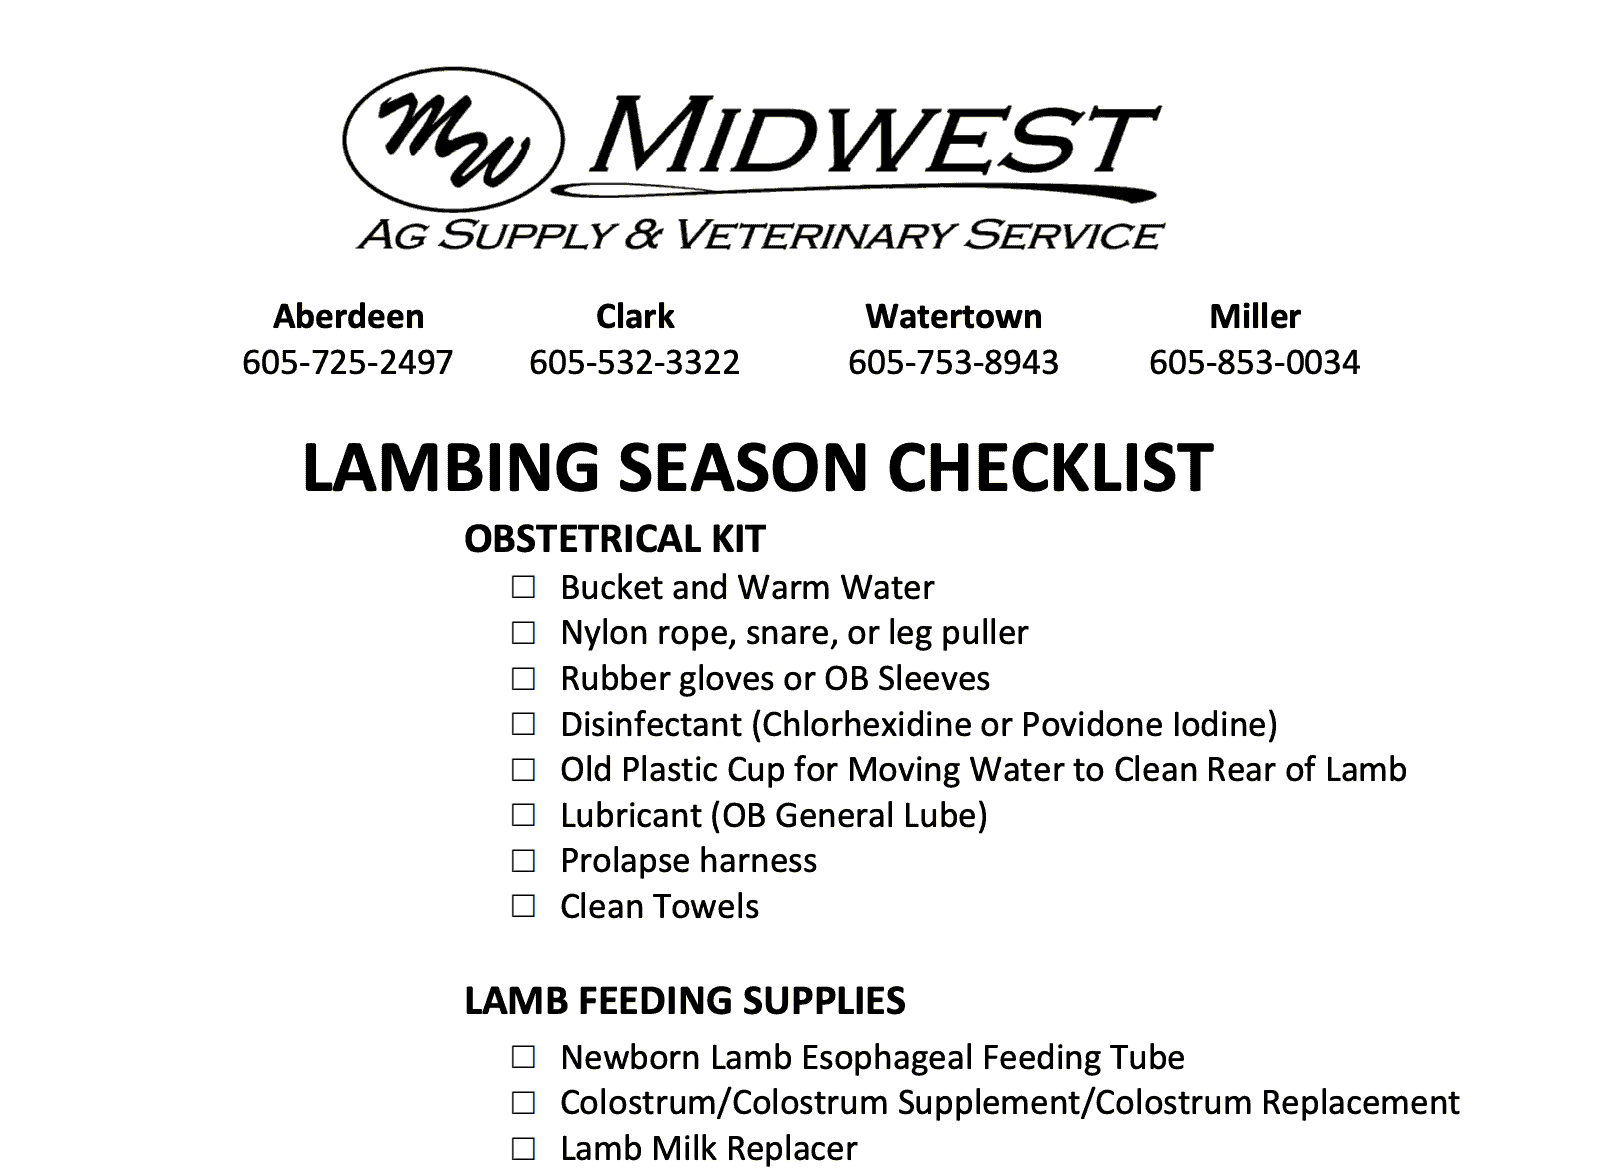 Midwest Veterinary Services | Your source for quality vet services, for both companion and production animals. Serving the Tri-State area of Iowa, Minnesota, South Dakota, and surrounding areas. We also offer a great selection of online veterinary supplies in our online store.